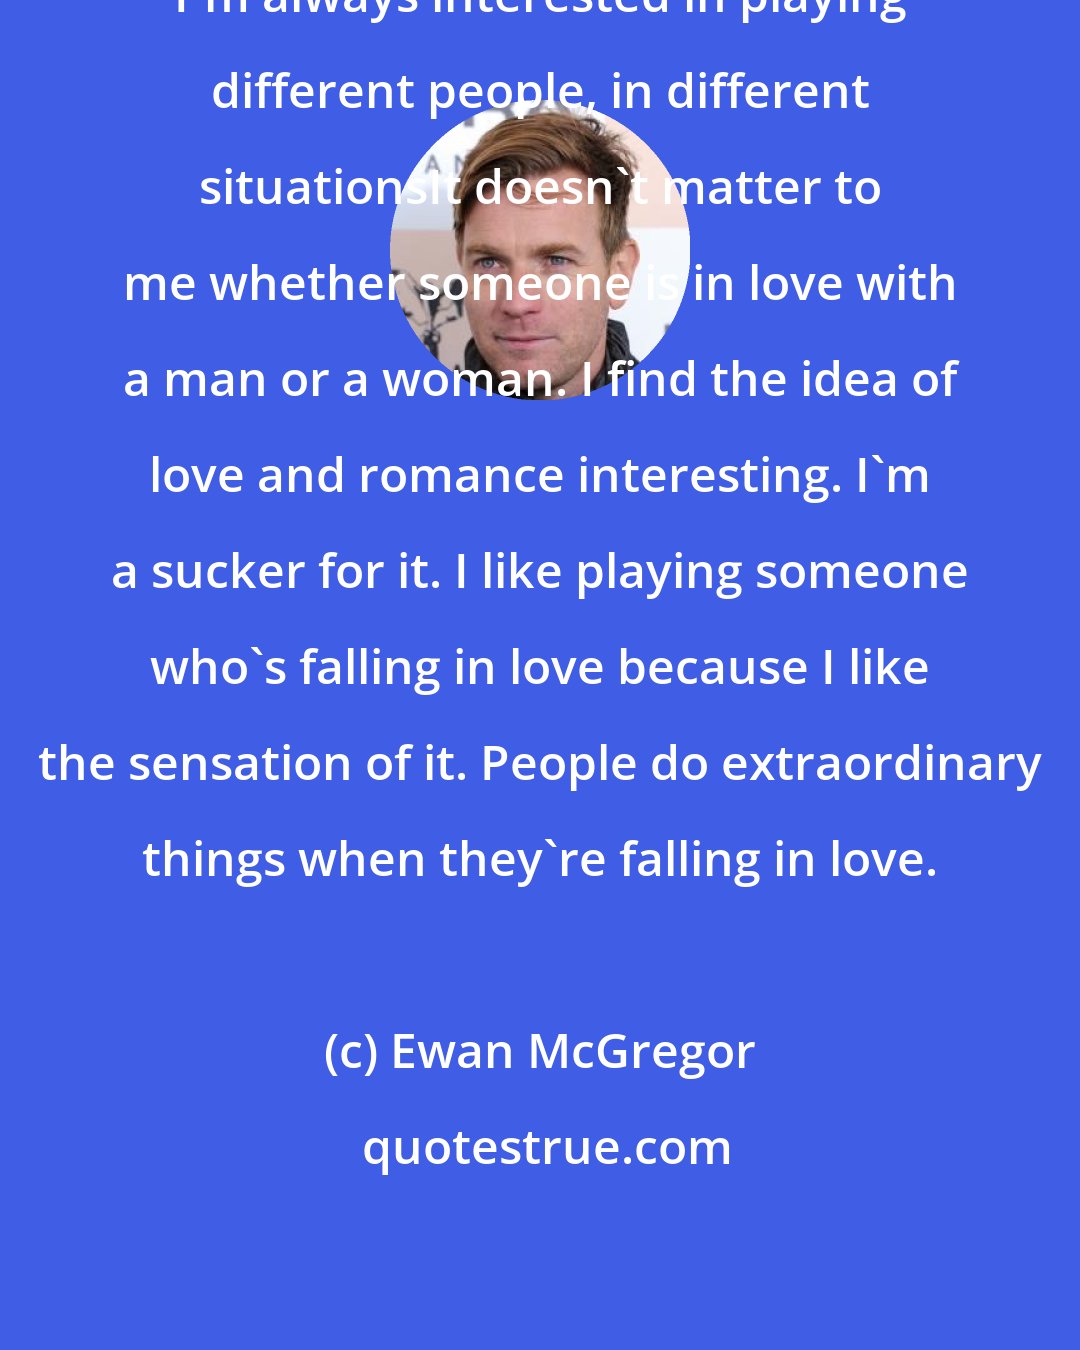 Ewan McGregor: I'm always interested in playing different people, in different situationsIt doesn't matter to me whether someone is in love with a man or a woman. I find the idea of love and romance interesting. I'm a sucker for it. I like playing someone who's falling in love because I like the sensation of it. People do extraordinary things when they're falling in love.